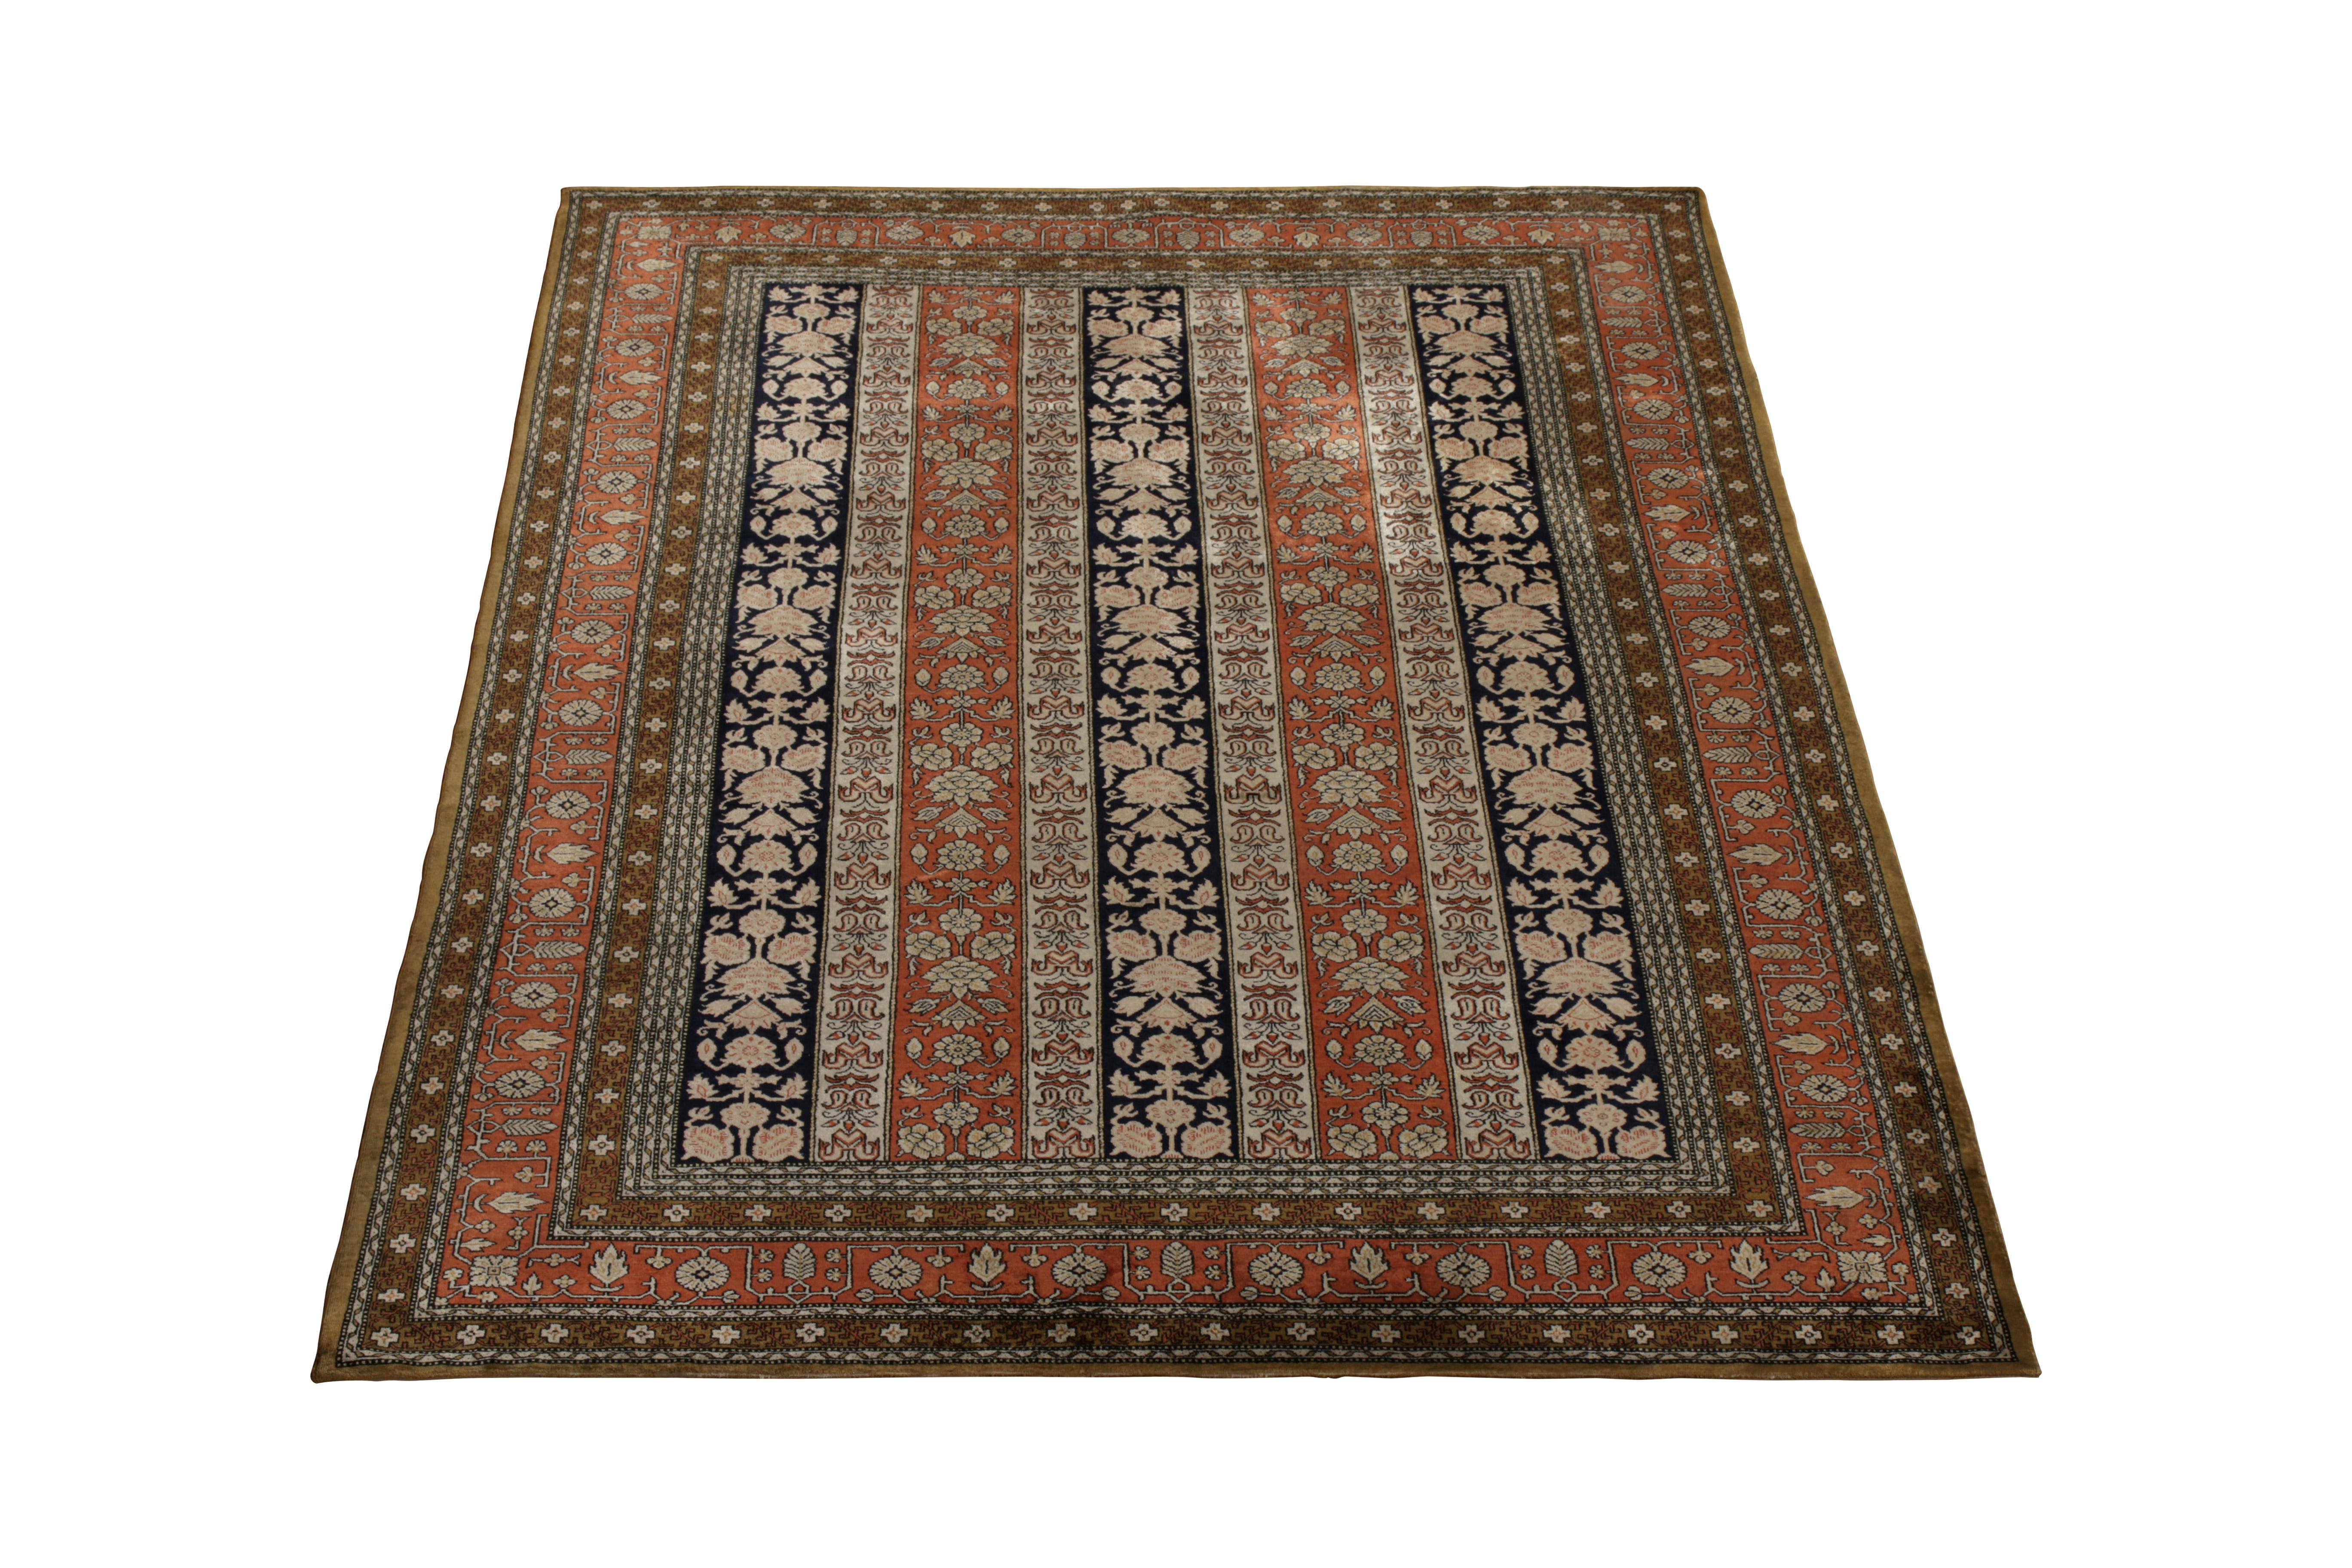 Hand knotted in brilliant silk originating circa 1950-1960, this vintage Persian rug connotes a rare midcentury Qum rug design, one of an exceptional pair able to be sold individually or together for collectors interested in the exceptional design